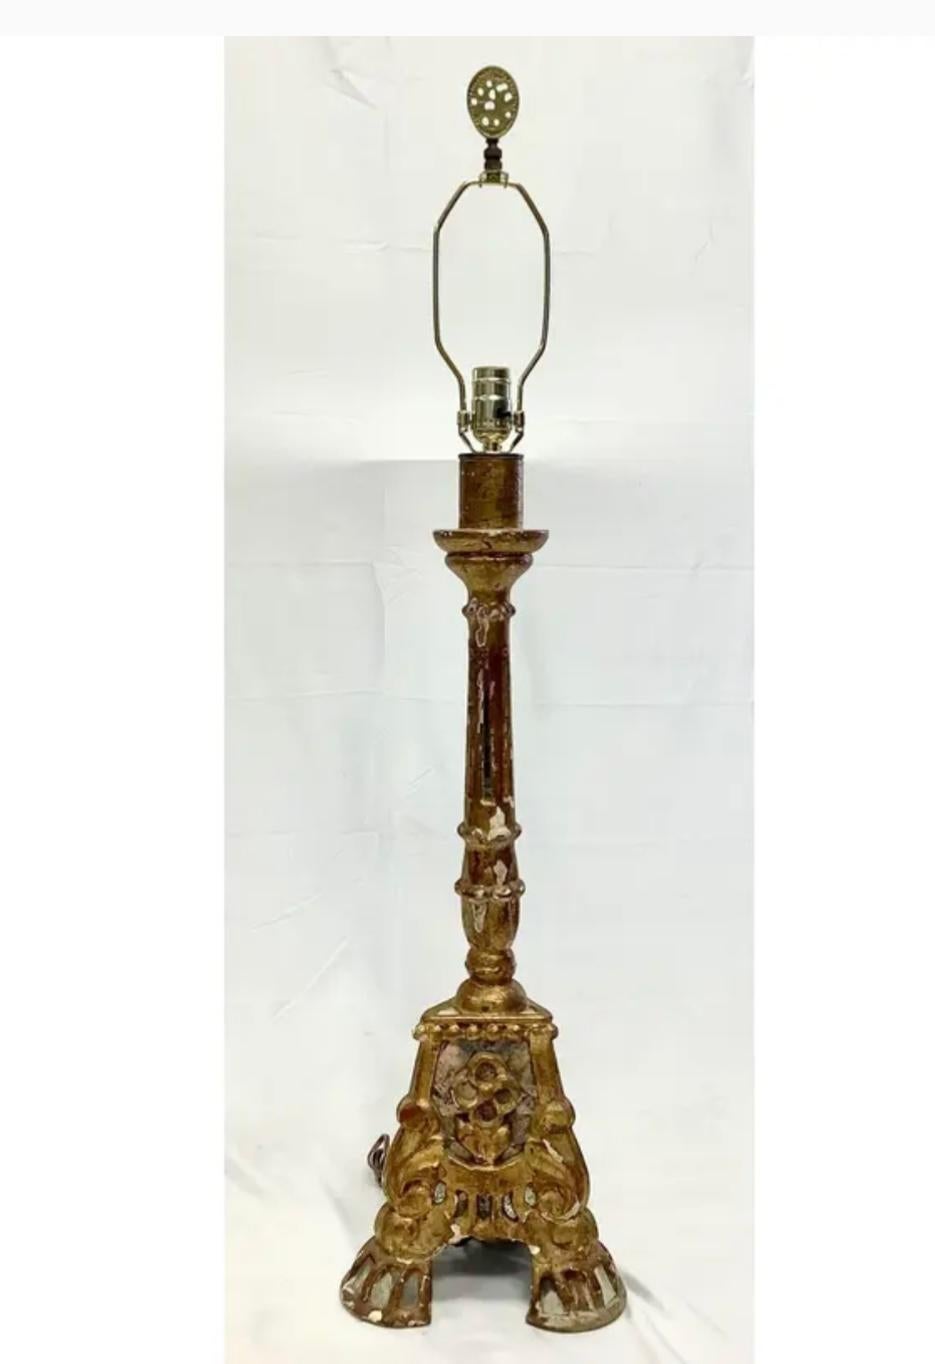 19th century Italian wood gilt candlestick lamp. Beautiful decorative details on every surface. Lamp rests on three scrolled feet. The harp is crowned with a charming brass finial. Base has mirrored mosaic pieces, some of which are cracked, giving